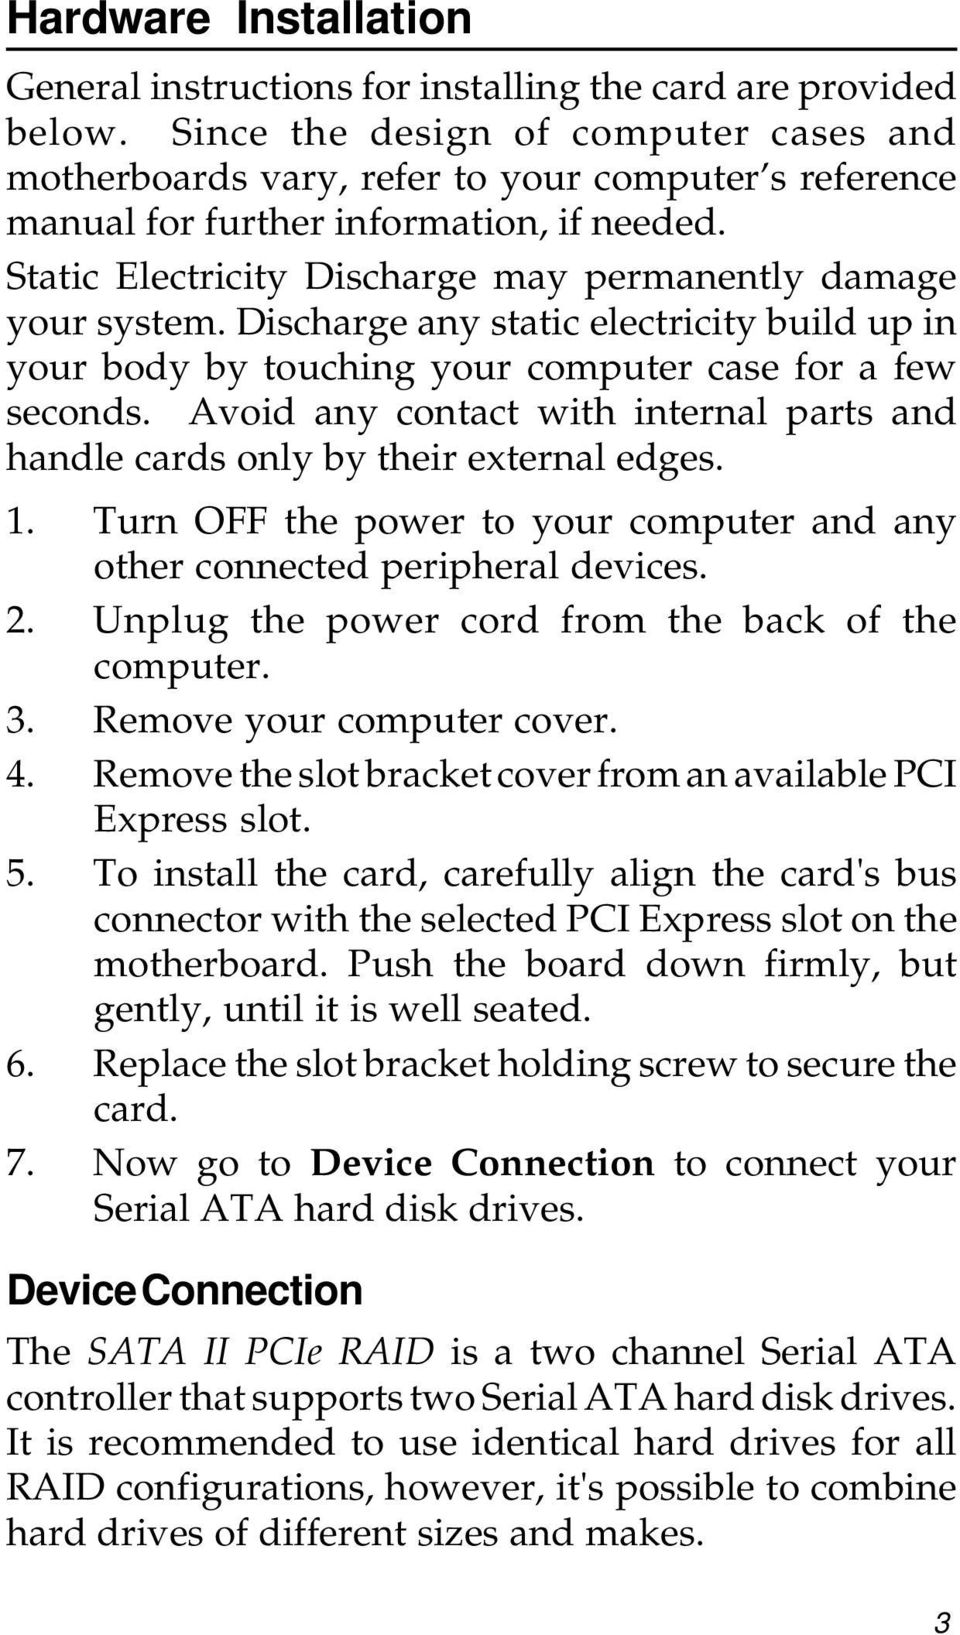 Discharge any static electricity build up in your body by touching your computer case for a few seconds. Avoid any contact with internal parts and handle cards only by their external edges. 1.